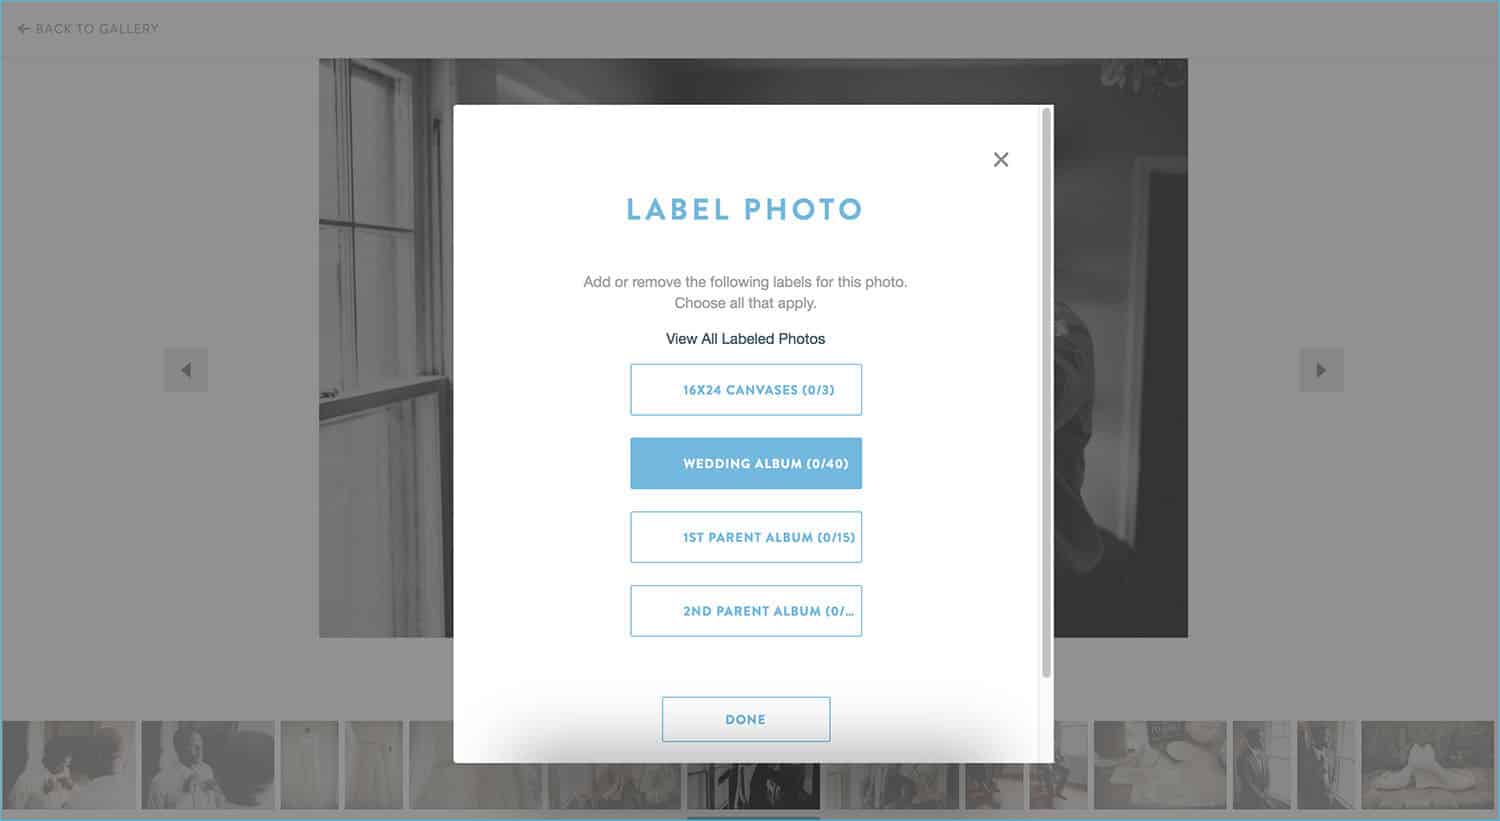 Labels: Help Your Clients Pick Their Favorite Photos FAST